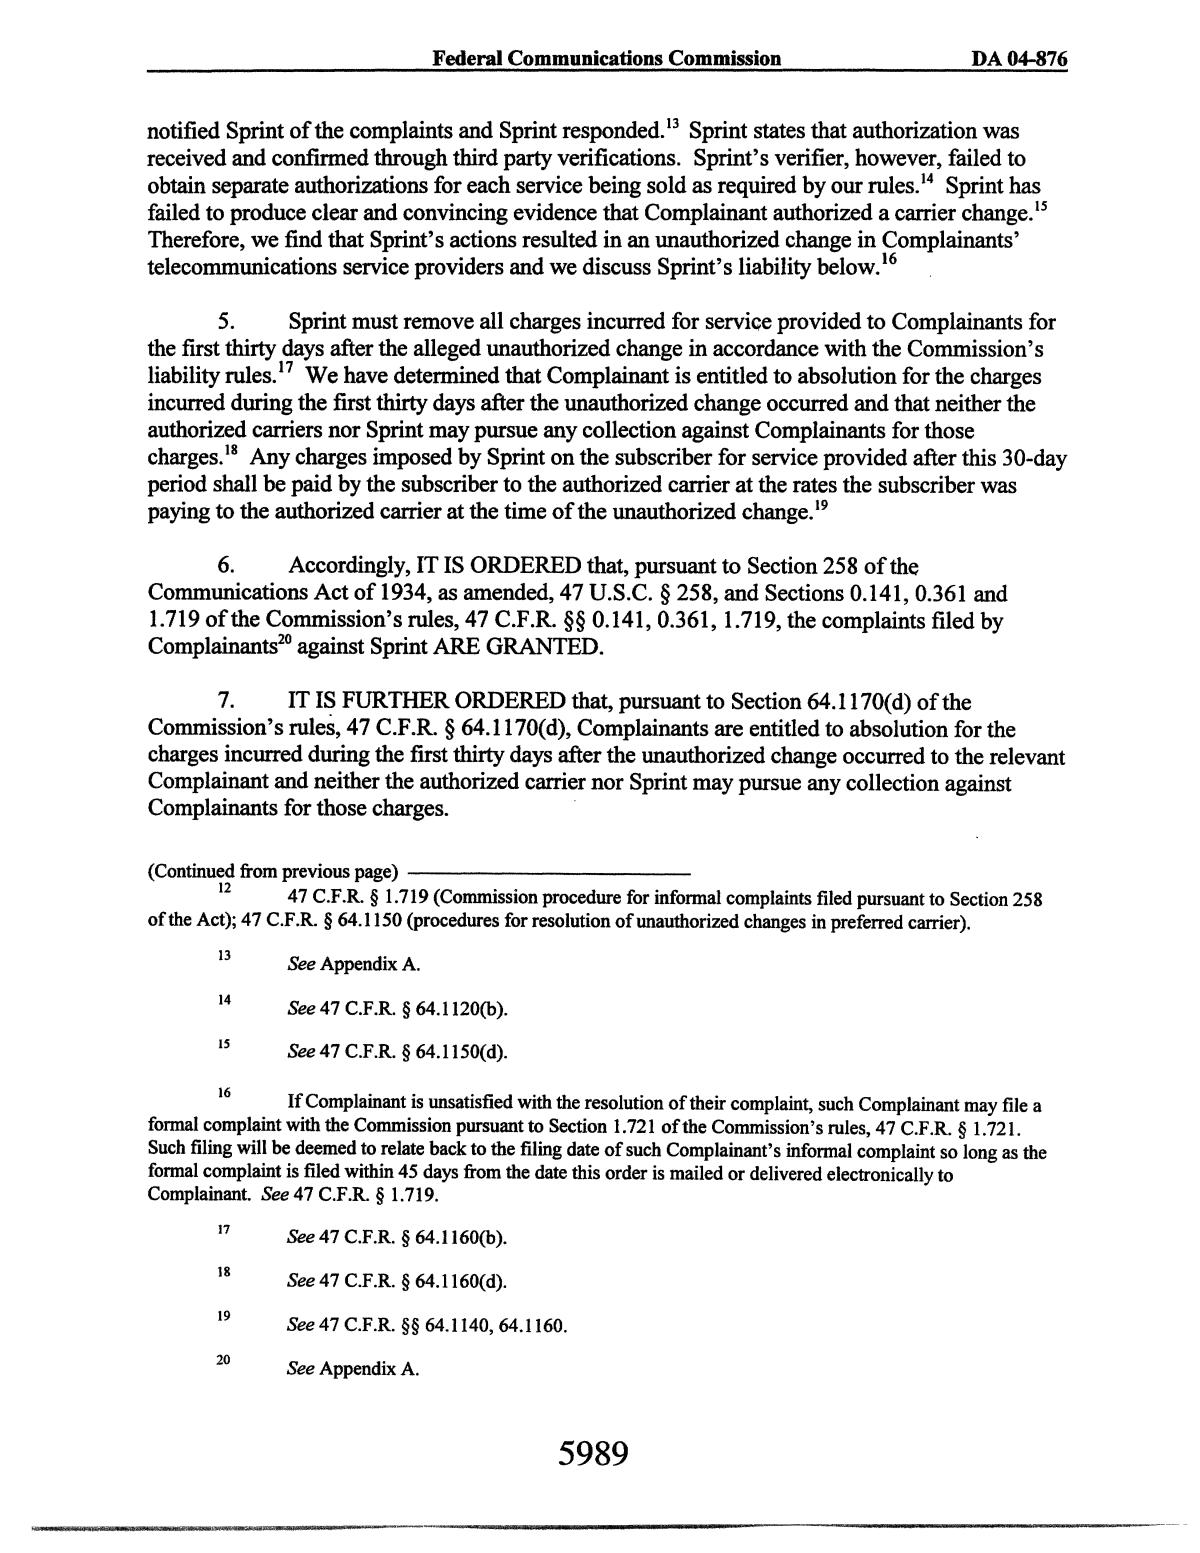 FCC Record, Volume 19, No. 8, Pages 5879 to 6813, March 31 - April 13, 2004
                                                
                                                    5989
                                                